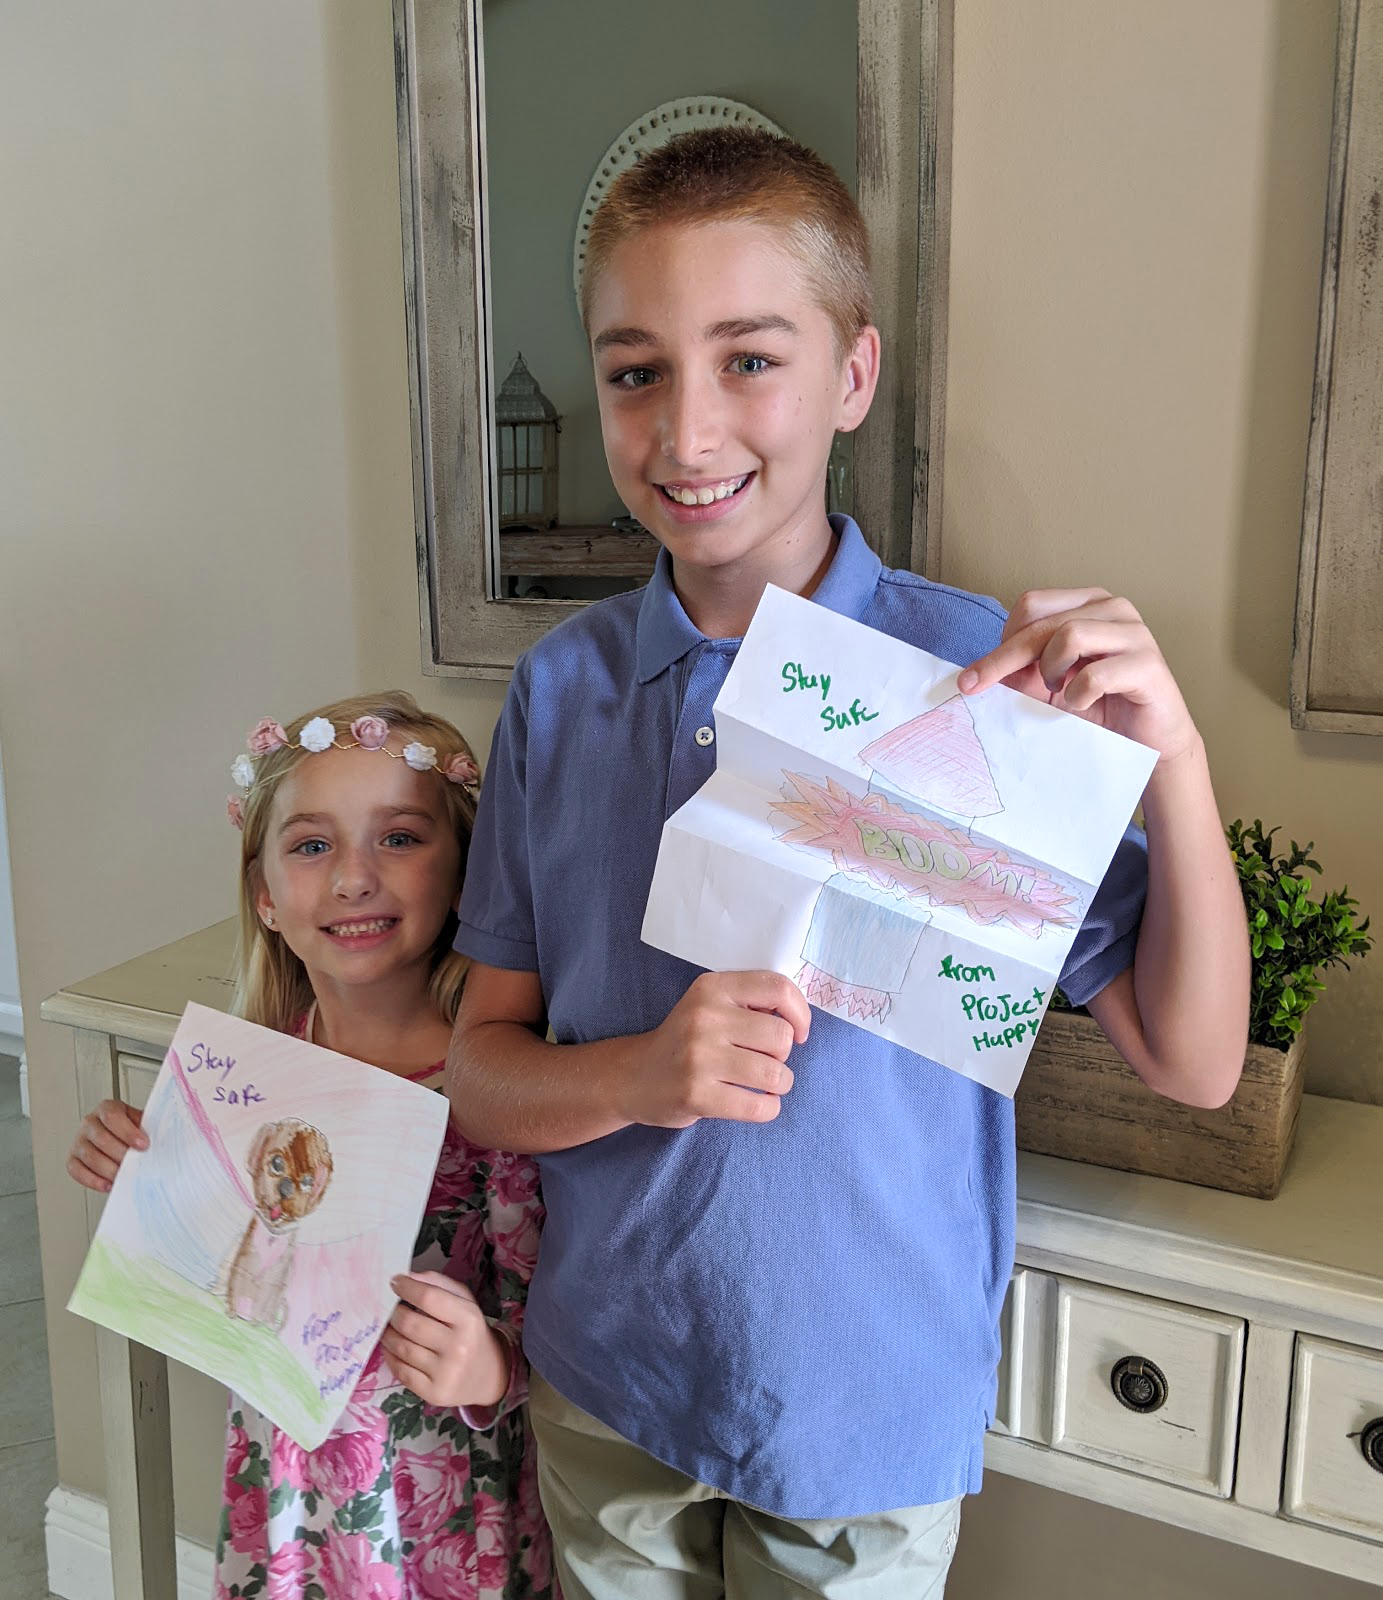 Kinley McGill, who is 6 years old, and her 10-year-old brother Colton start Project Happy to put smiles on people's faces during the COVID-19 pandemic. Courtesy photo.